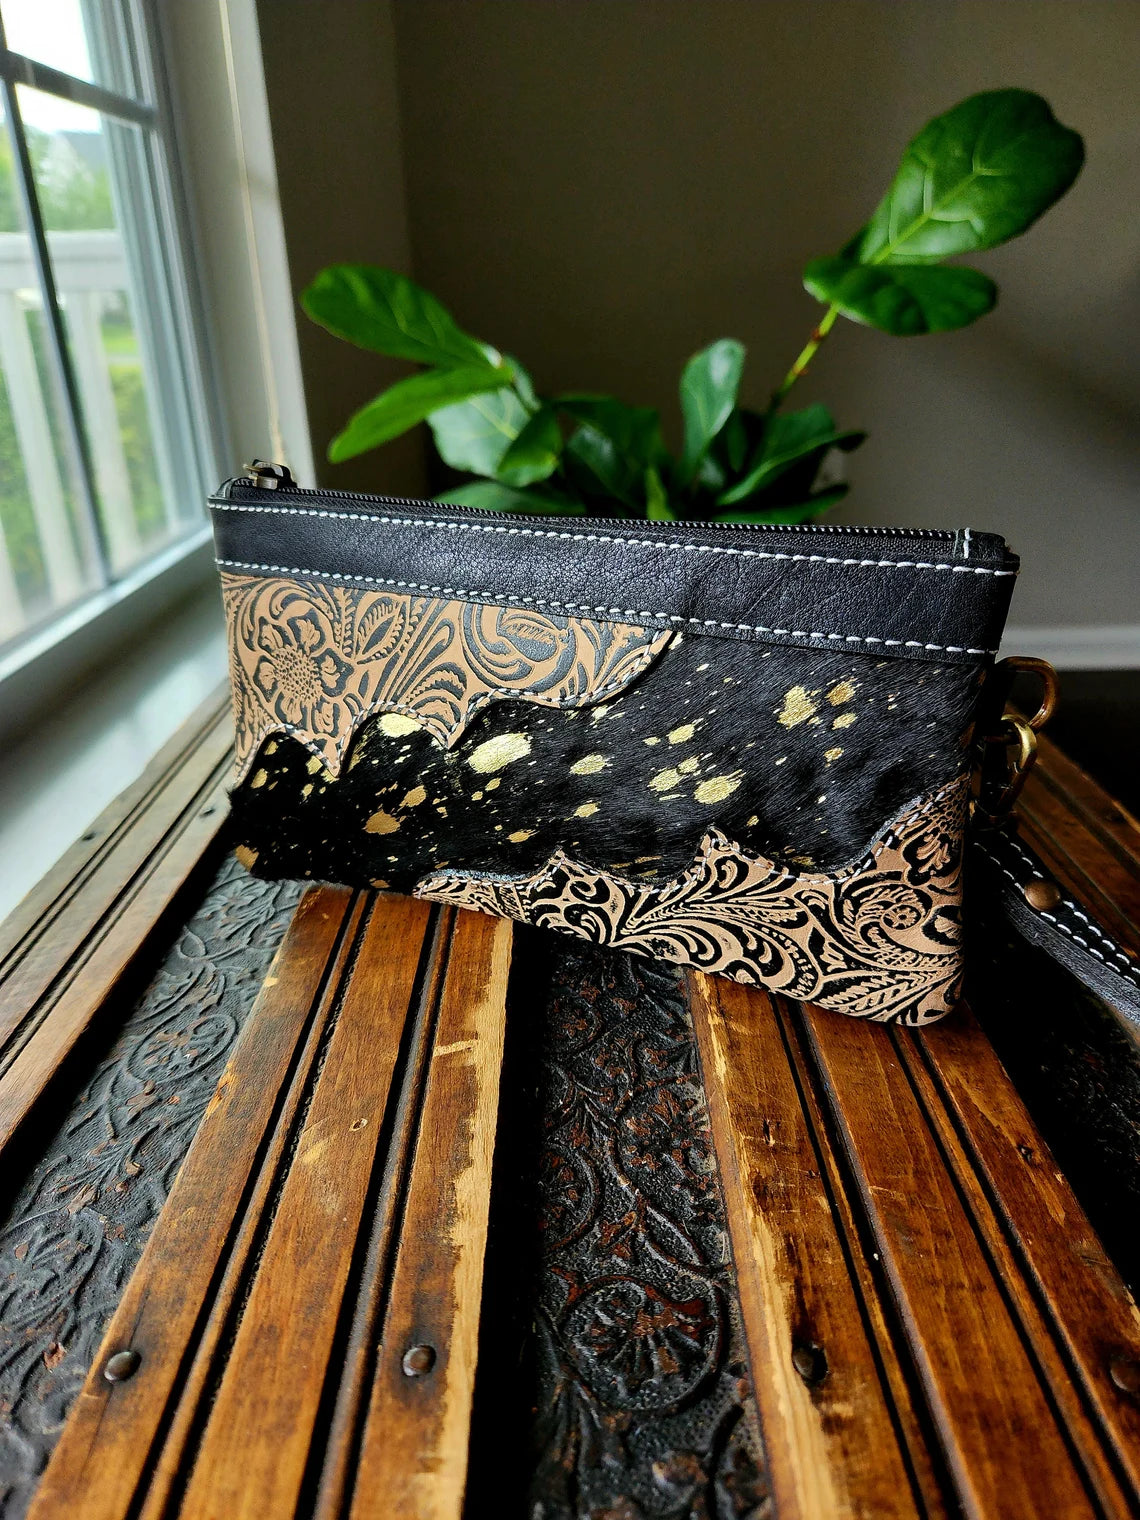 Tooled Leather and Cowhide wristlets